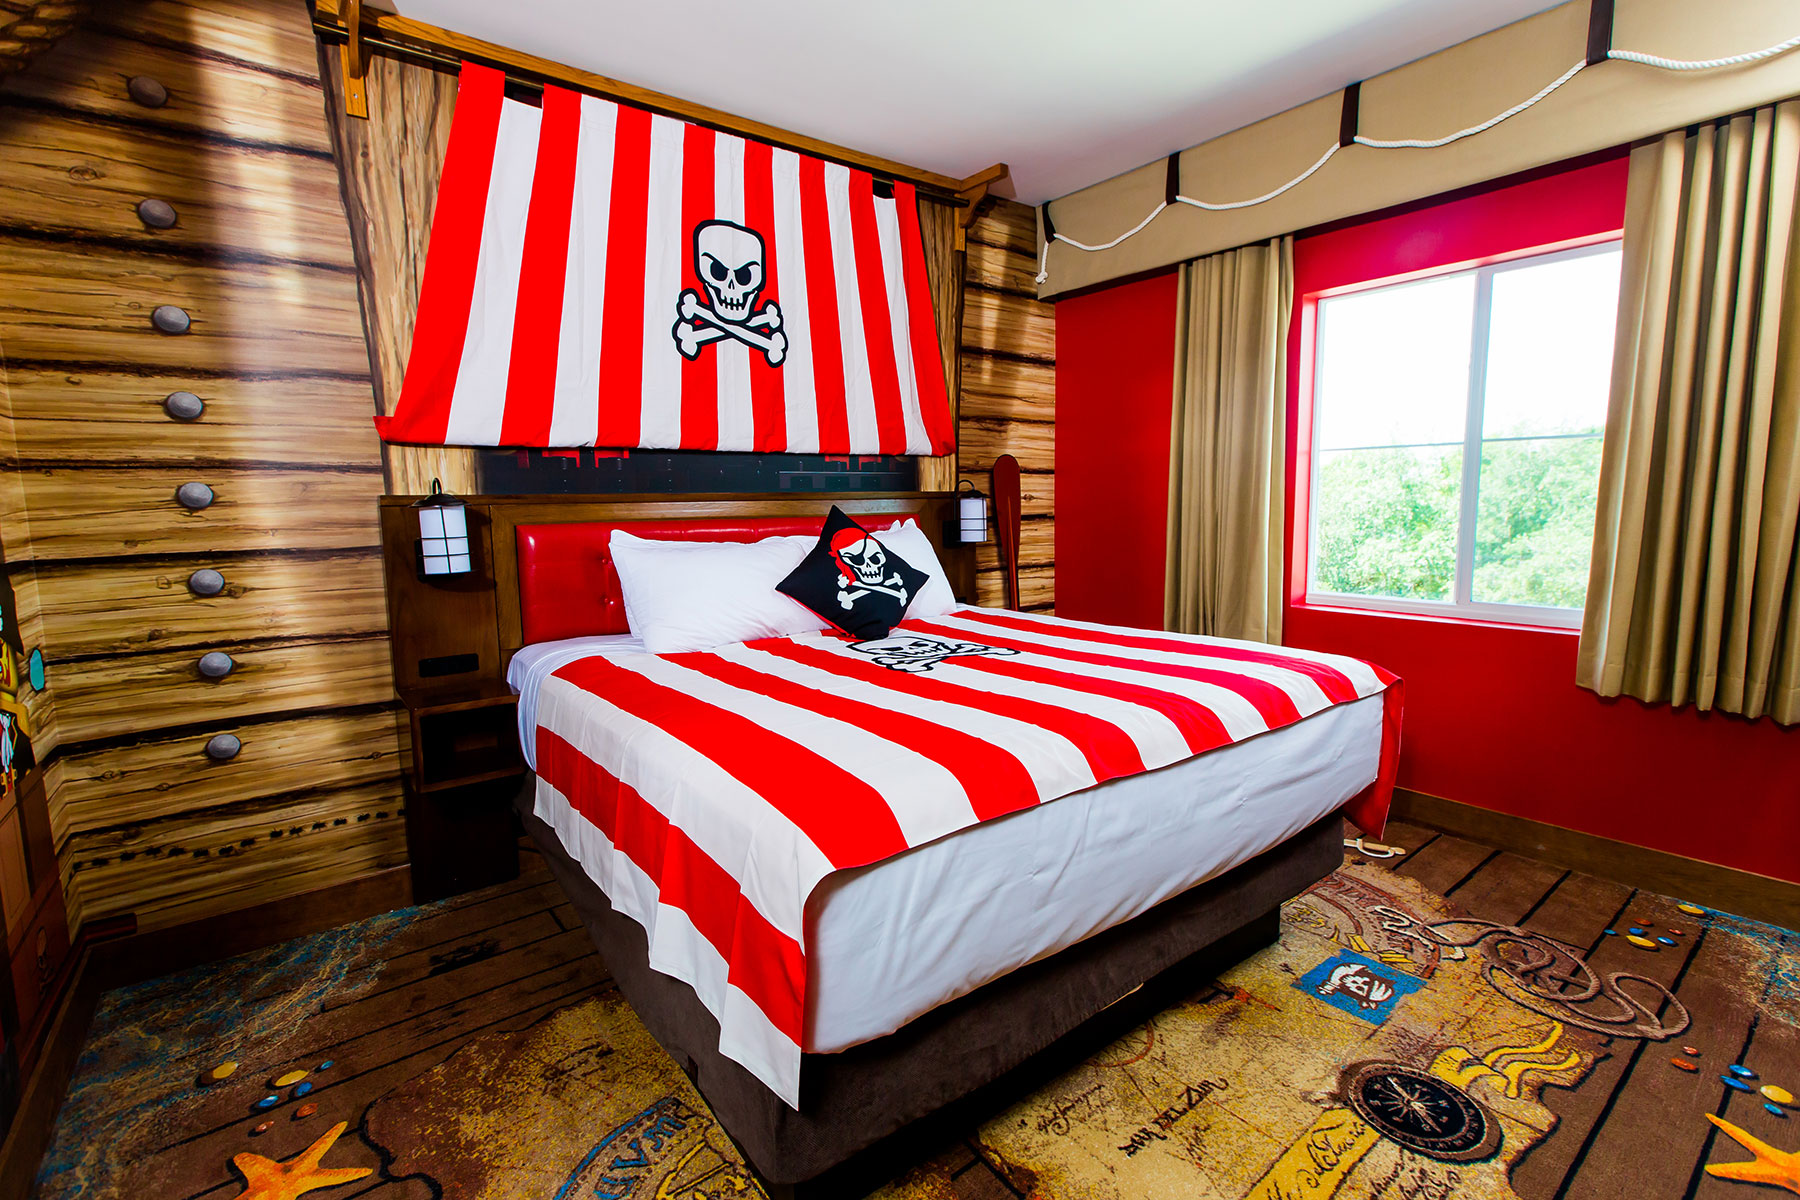 Set sail with Pirate Rooms